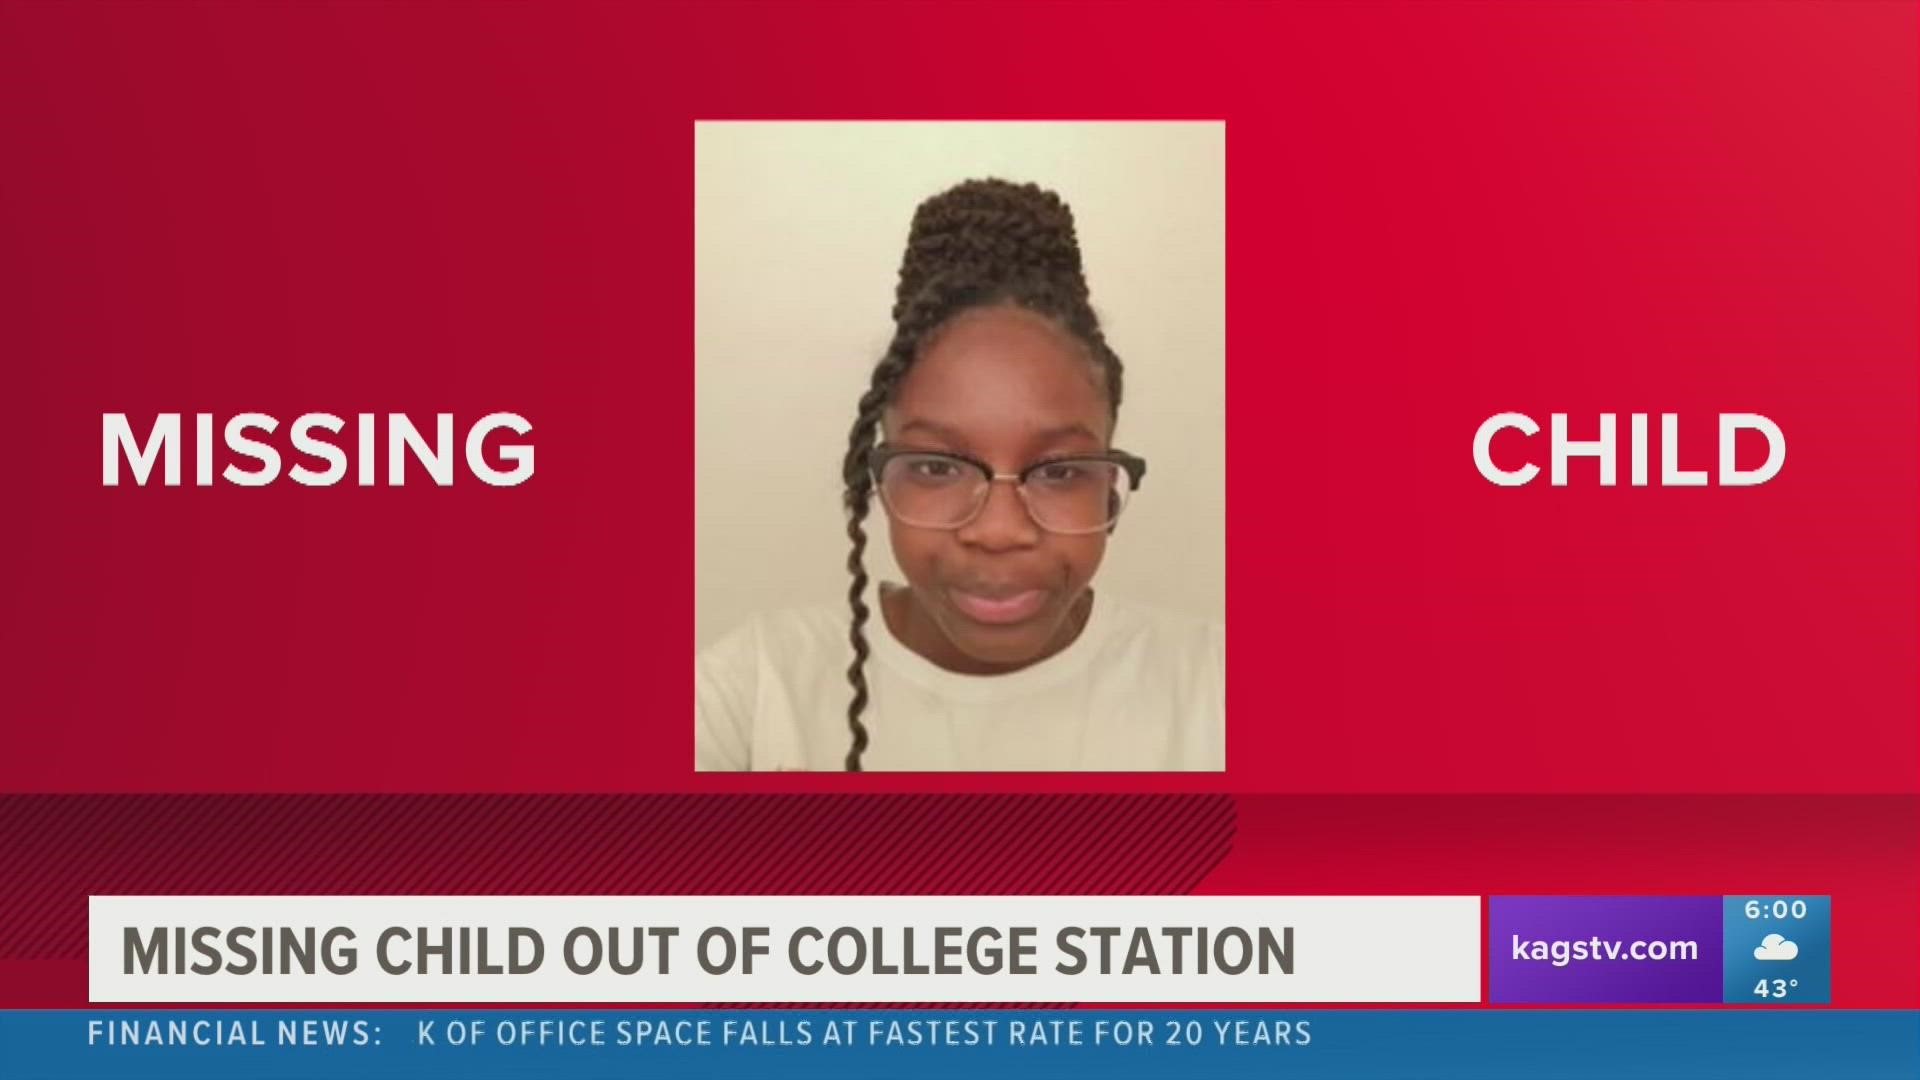 The female in question has reportedly been missing since Wednesday, Nov. 16. She was previously seen in the 300 block of Manuel Drive in College Station.